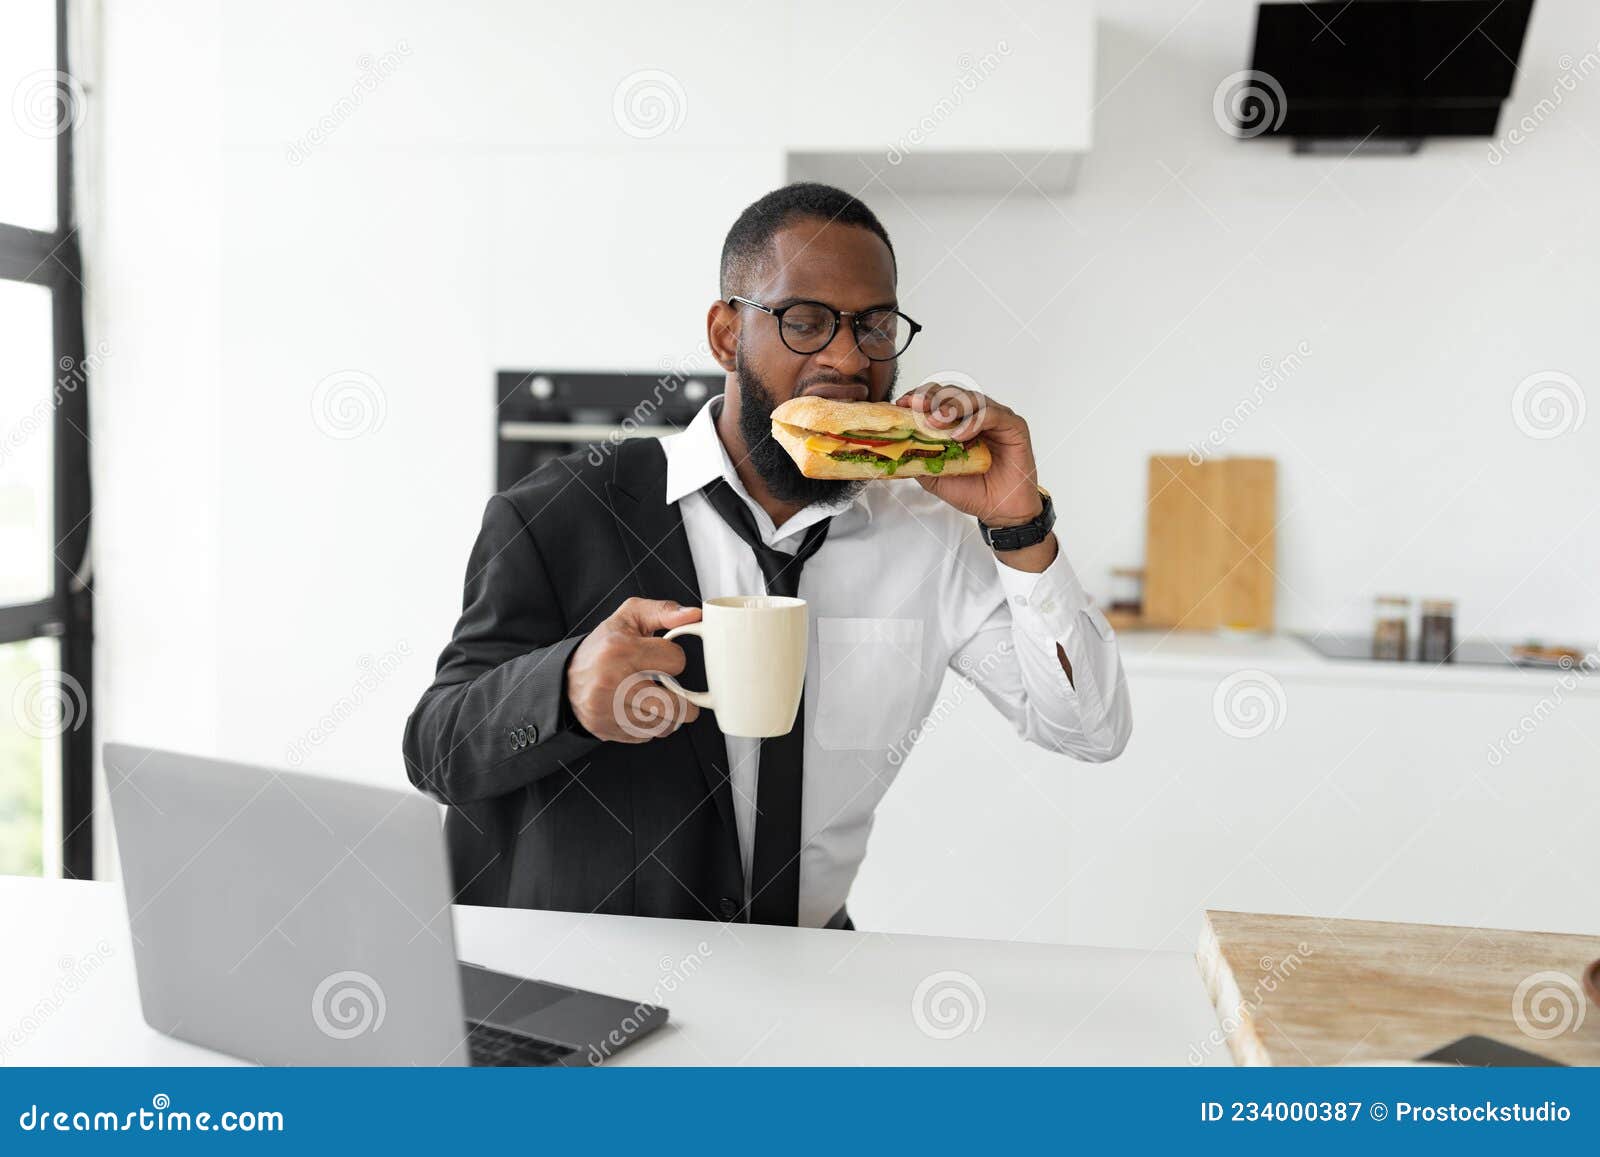 https://thumbs.dreamstime.com/z/black-man-rushing-to-work-eating-sandwich-home-portrait-busy-manager-worker-glasses-having-breakfast-kitchen-wearing-suit-234000387.jpg